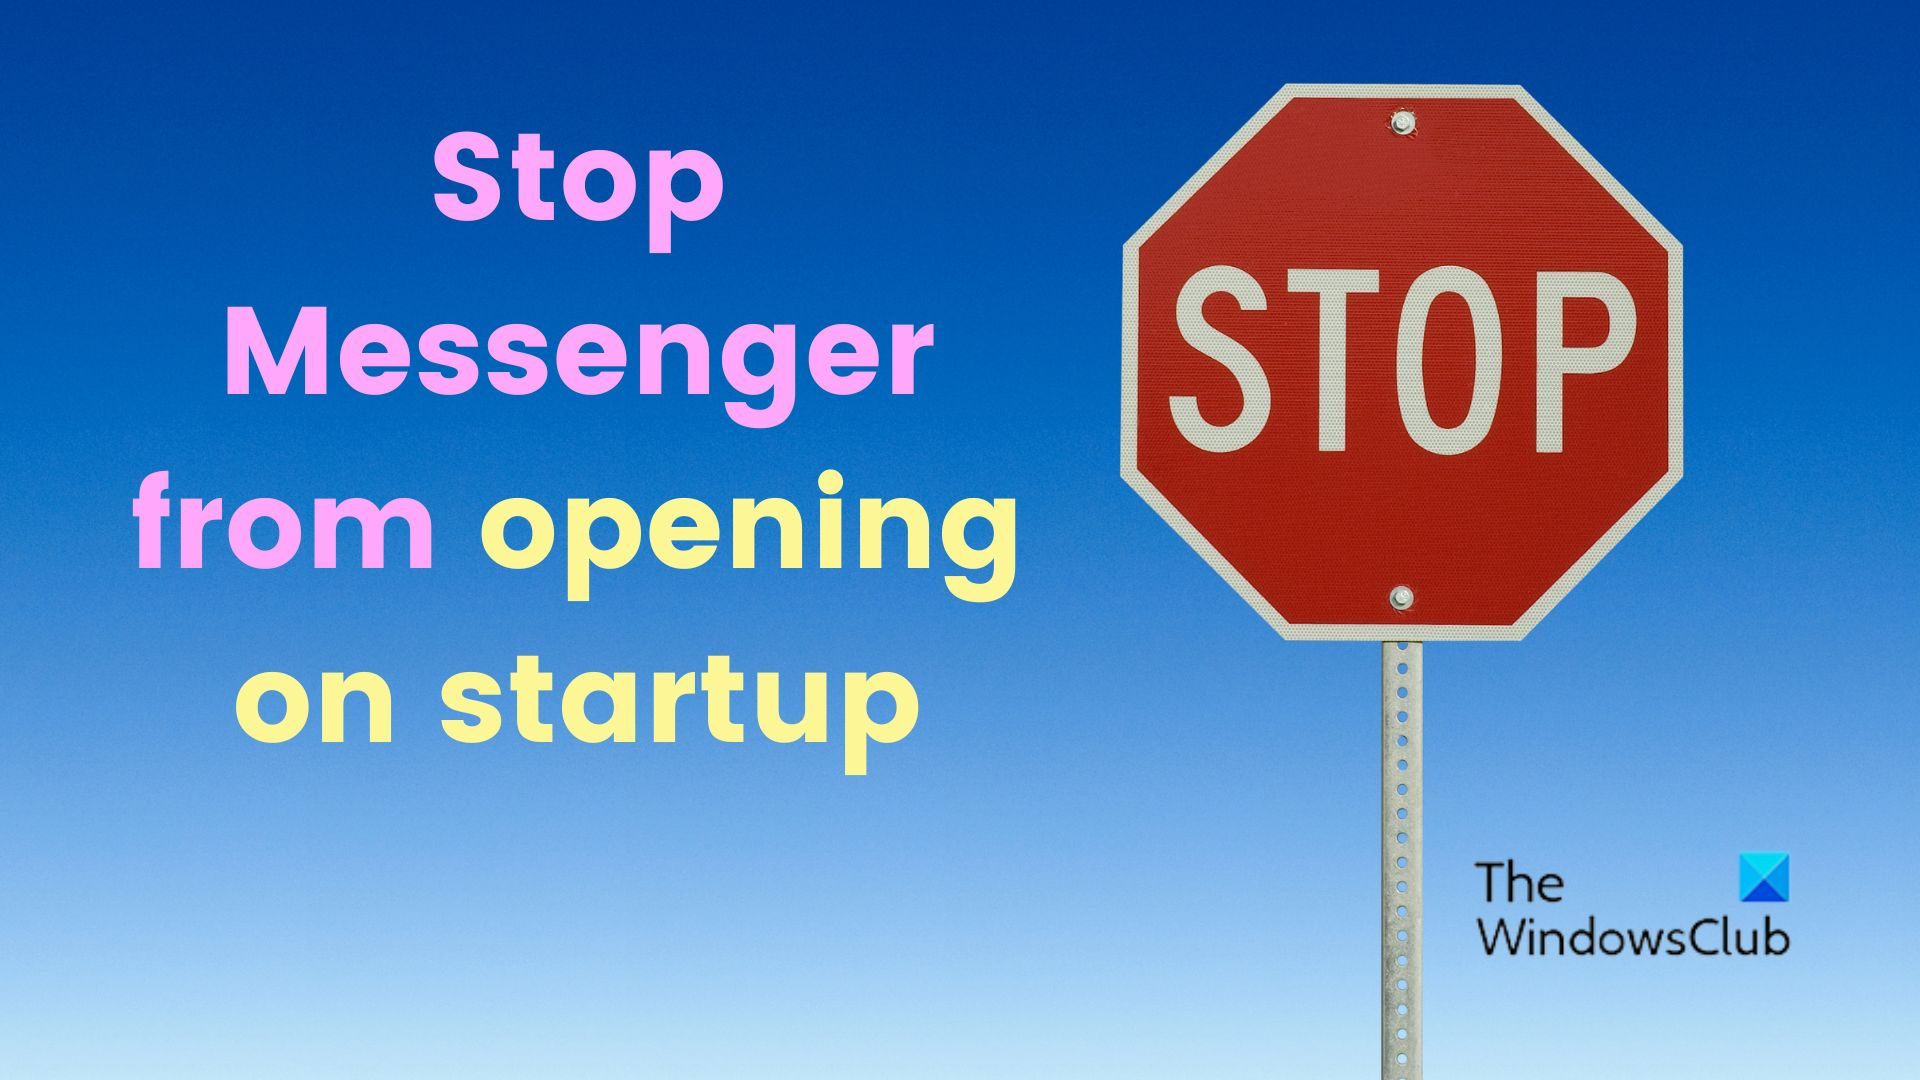 Stop Messenger from opening on startup on Windows